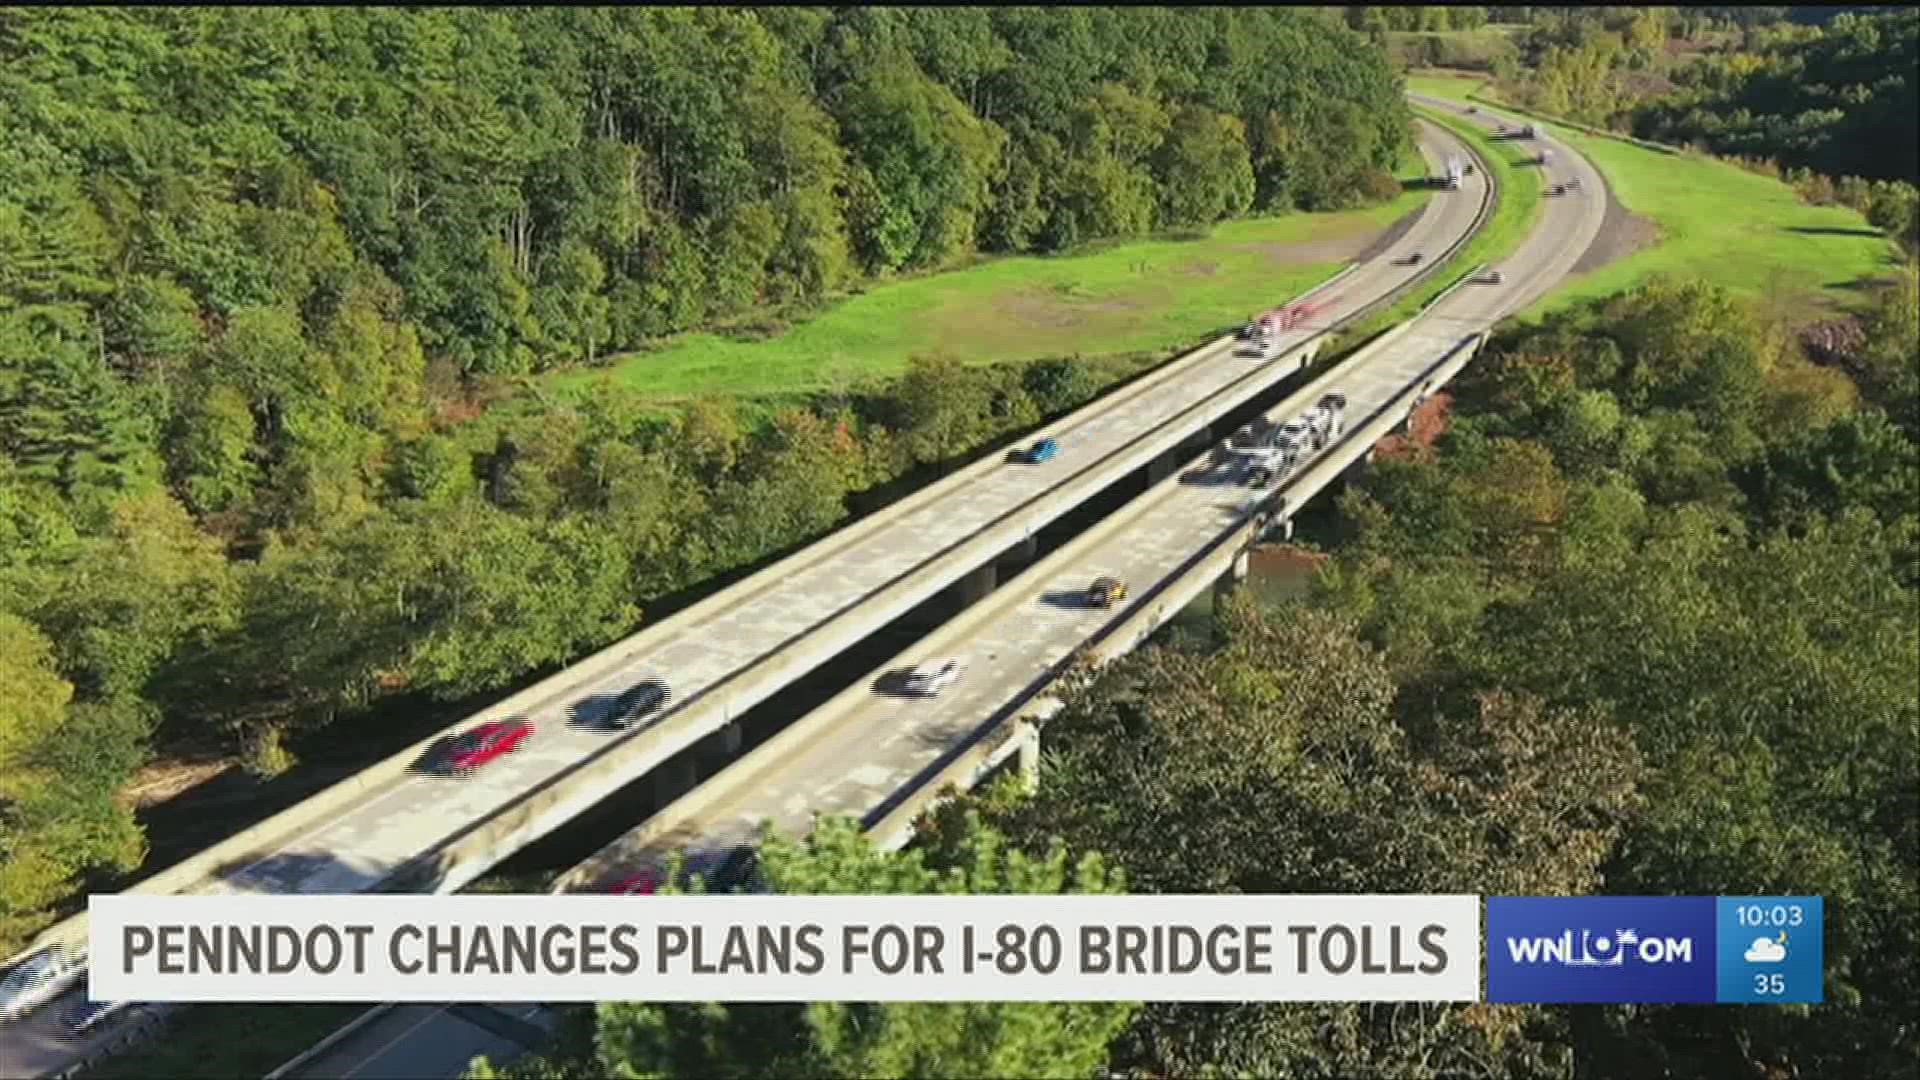 Two bridges along I-80 are also included in PennDOT's toll plans, but those plans have changed.